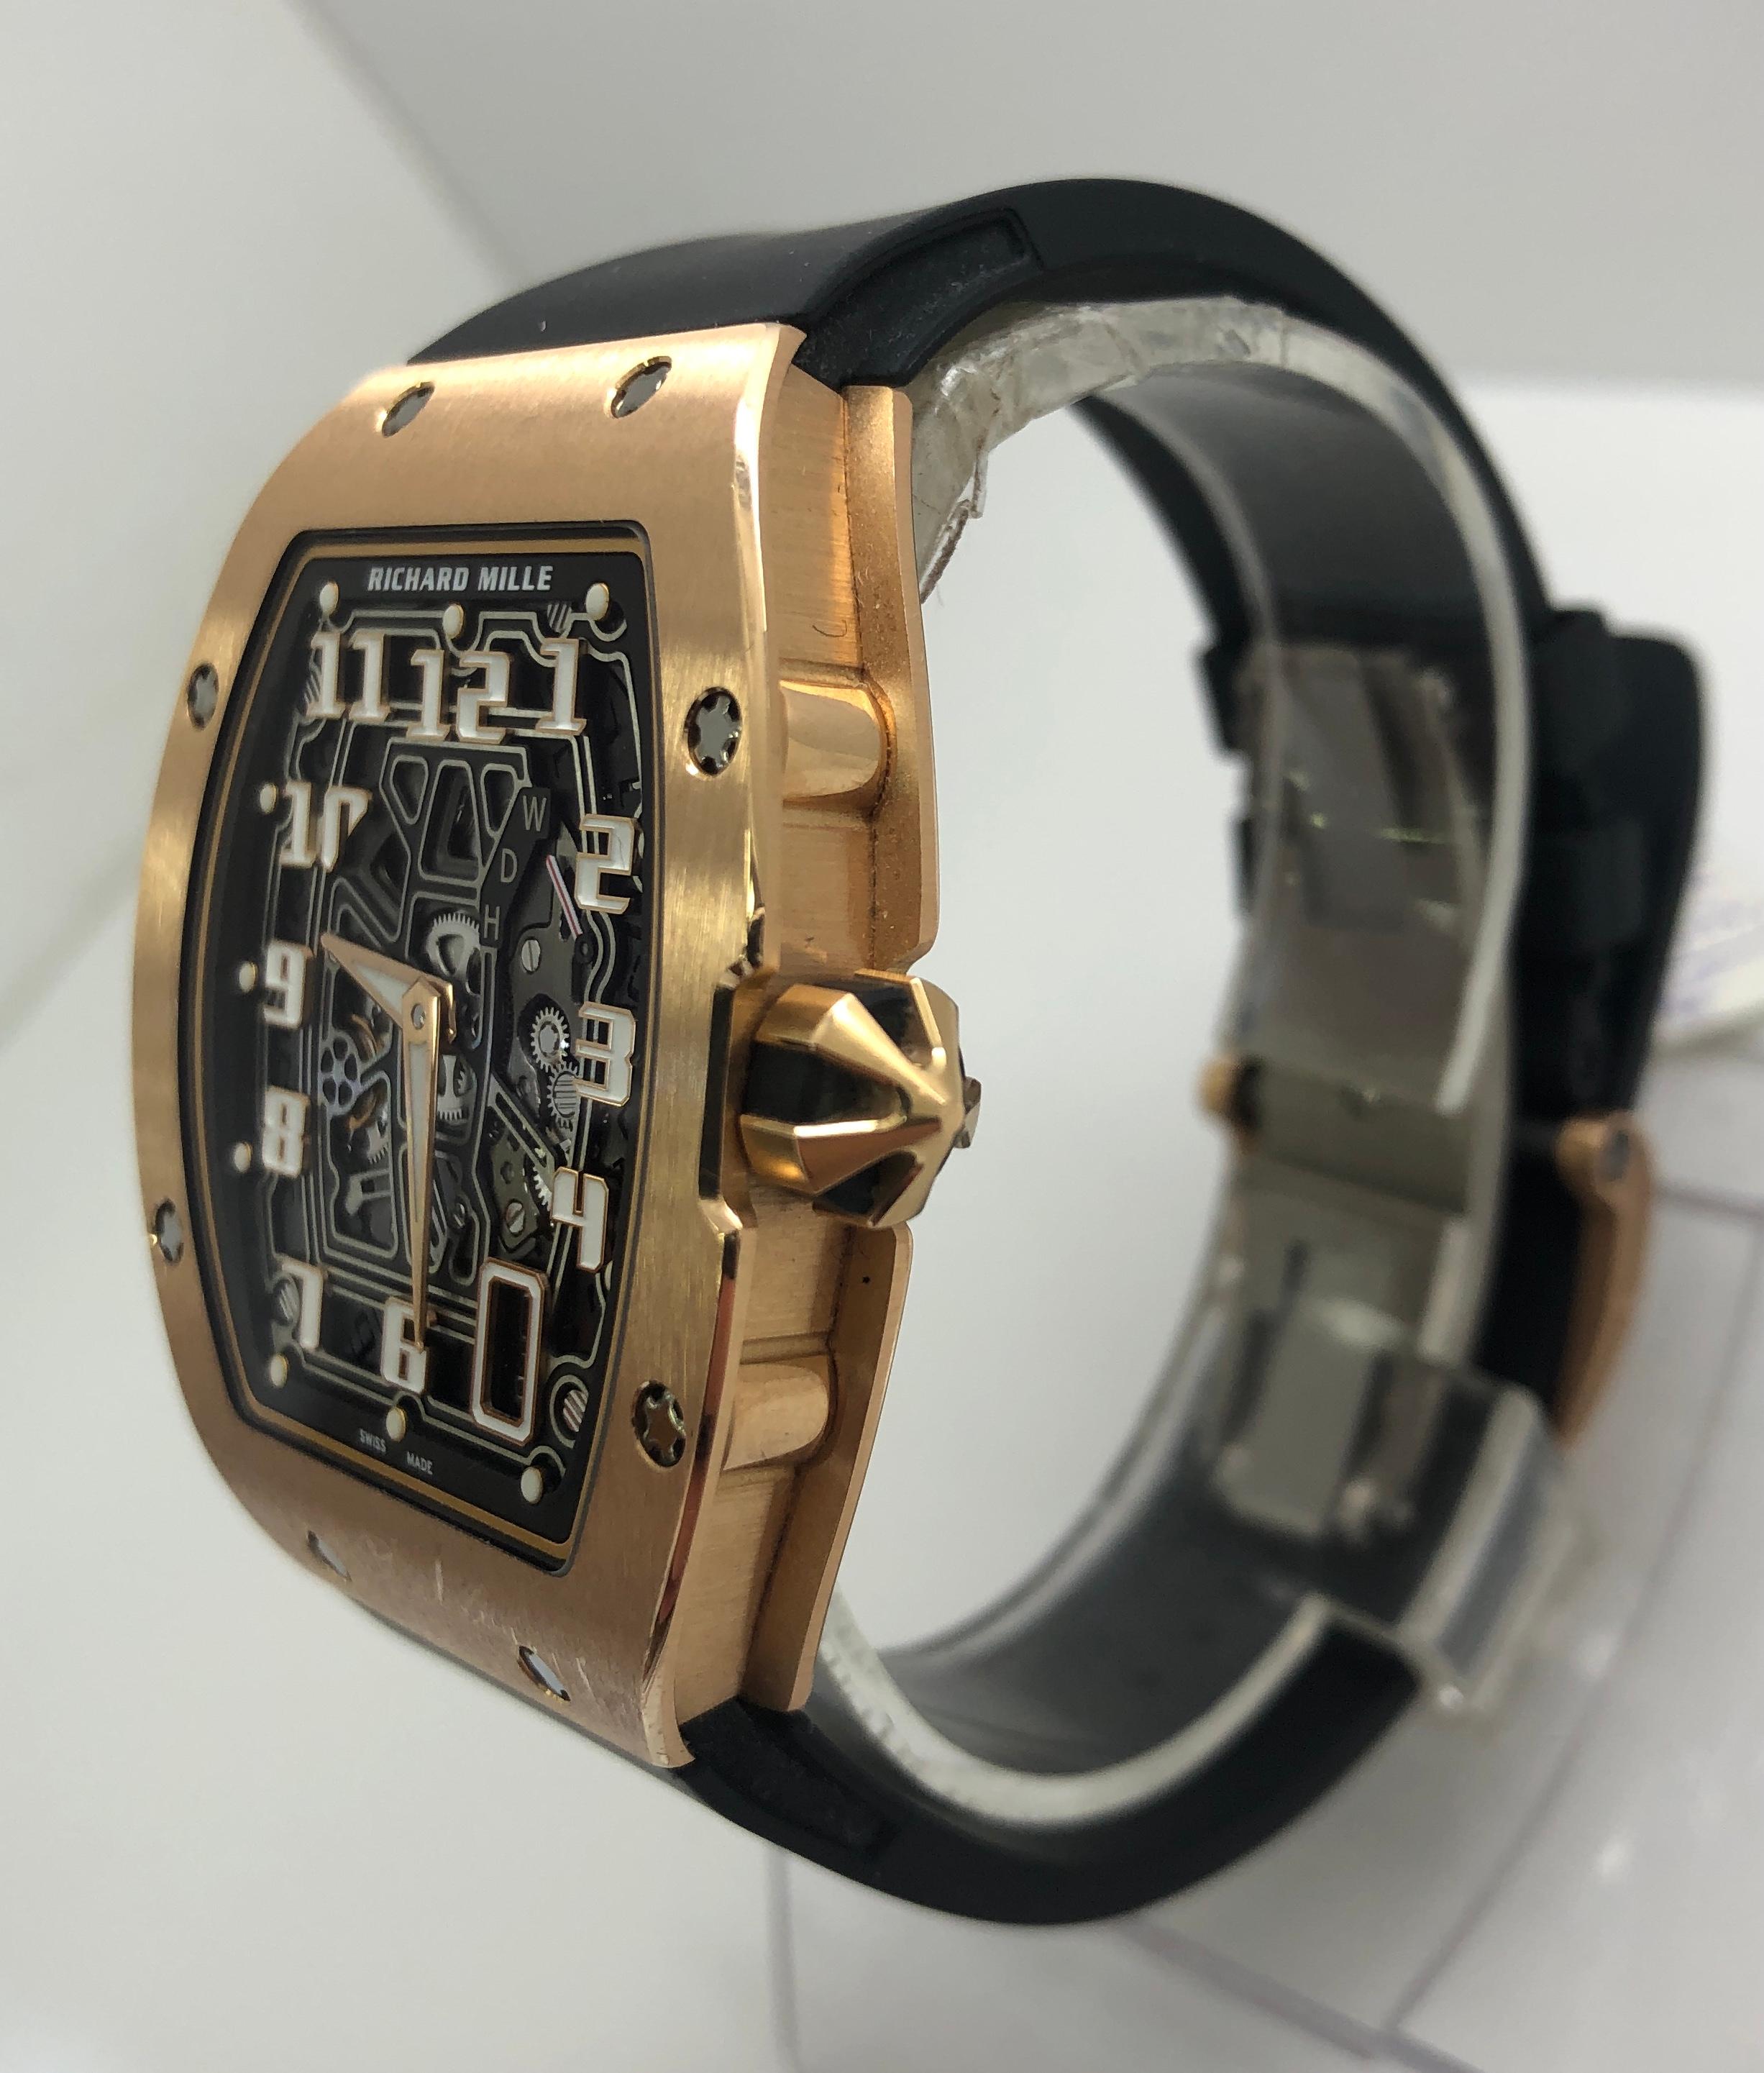 Richard Mille 67-01 Mens  Rose Gold Watch

will fit up to 9 inch wrist

new box papers

shop with confidence